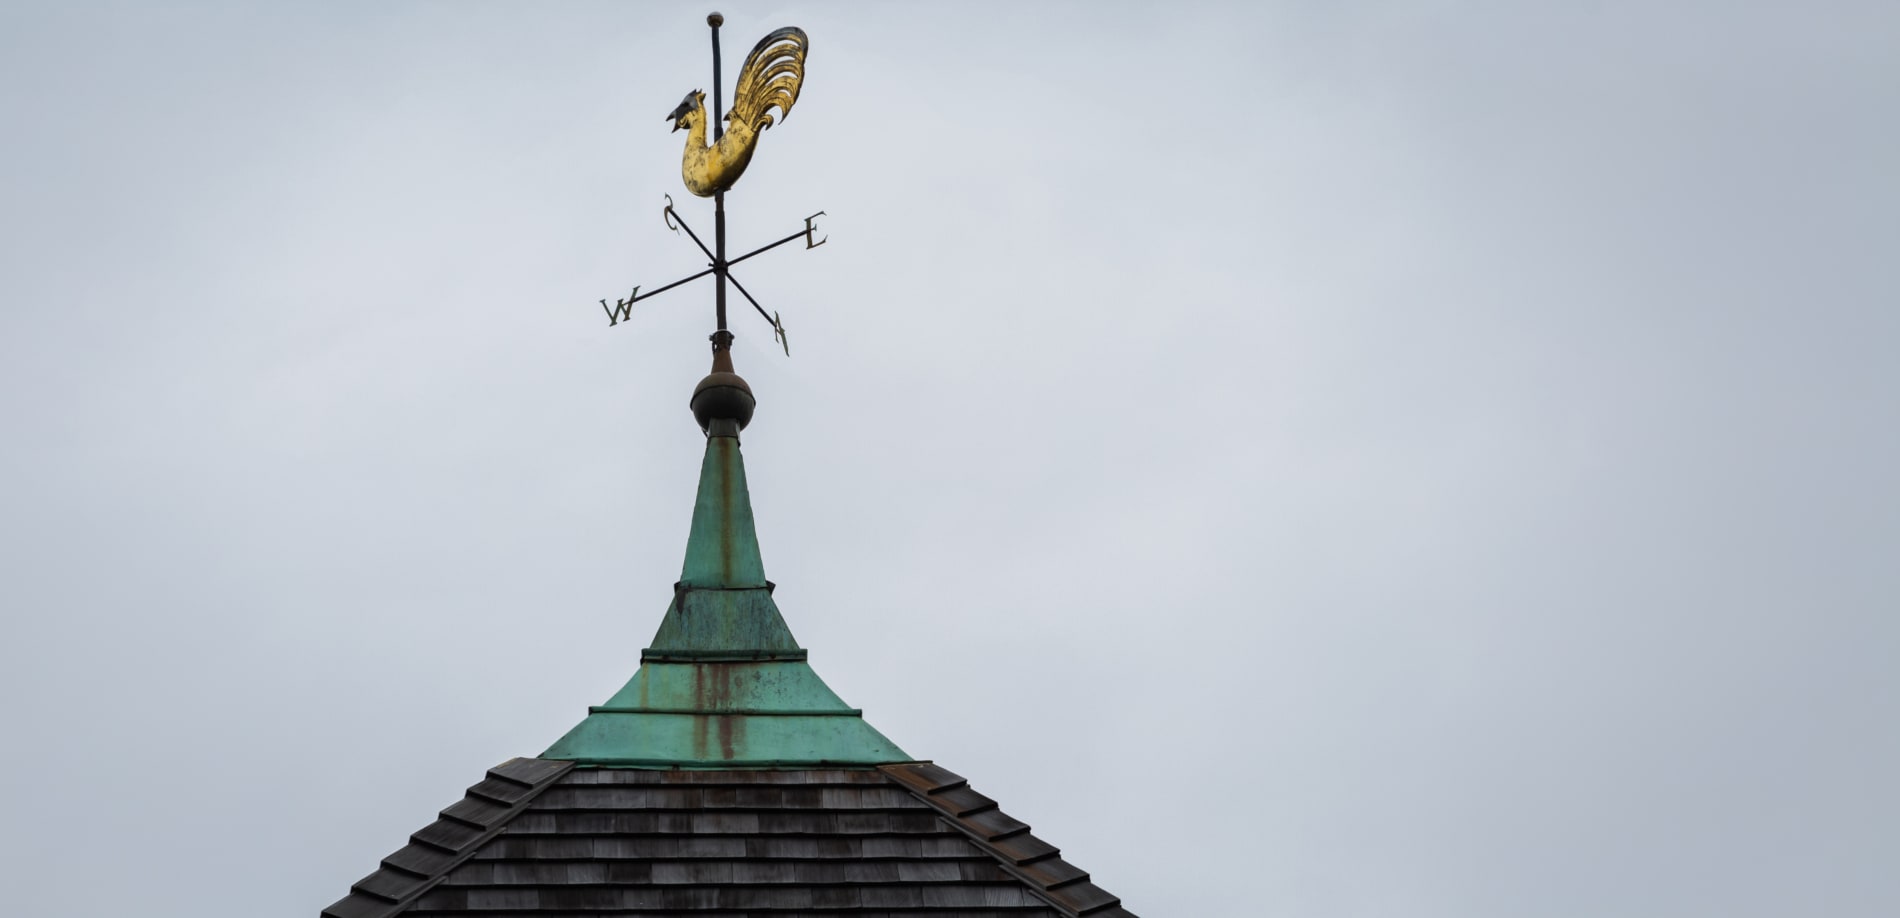 Tower with a rooster weathervane